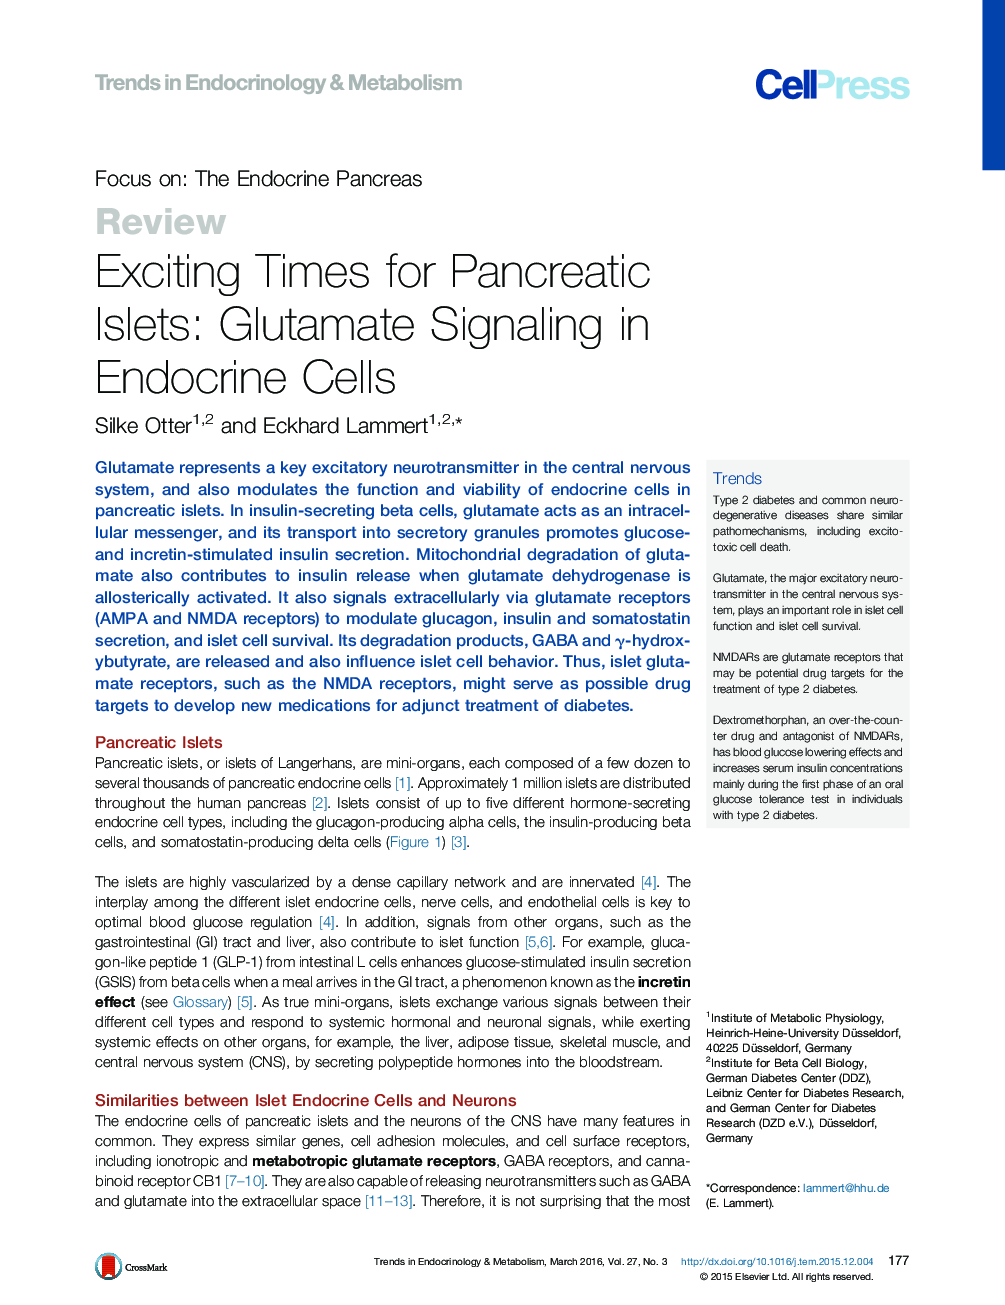 Exciting Times for Pancreatic Islets: Glutamate Signaling in Endocrine Cells